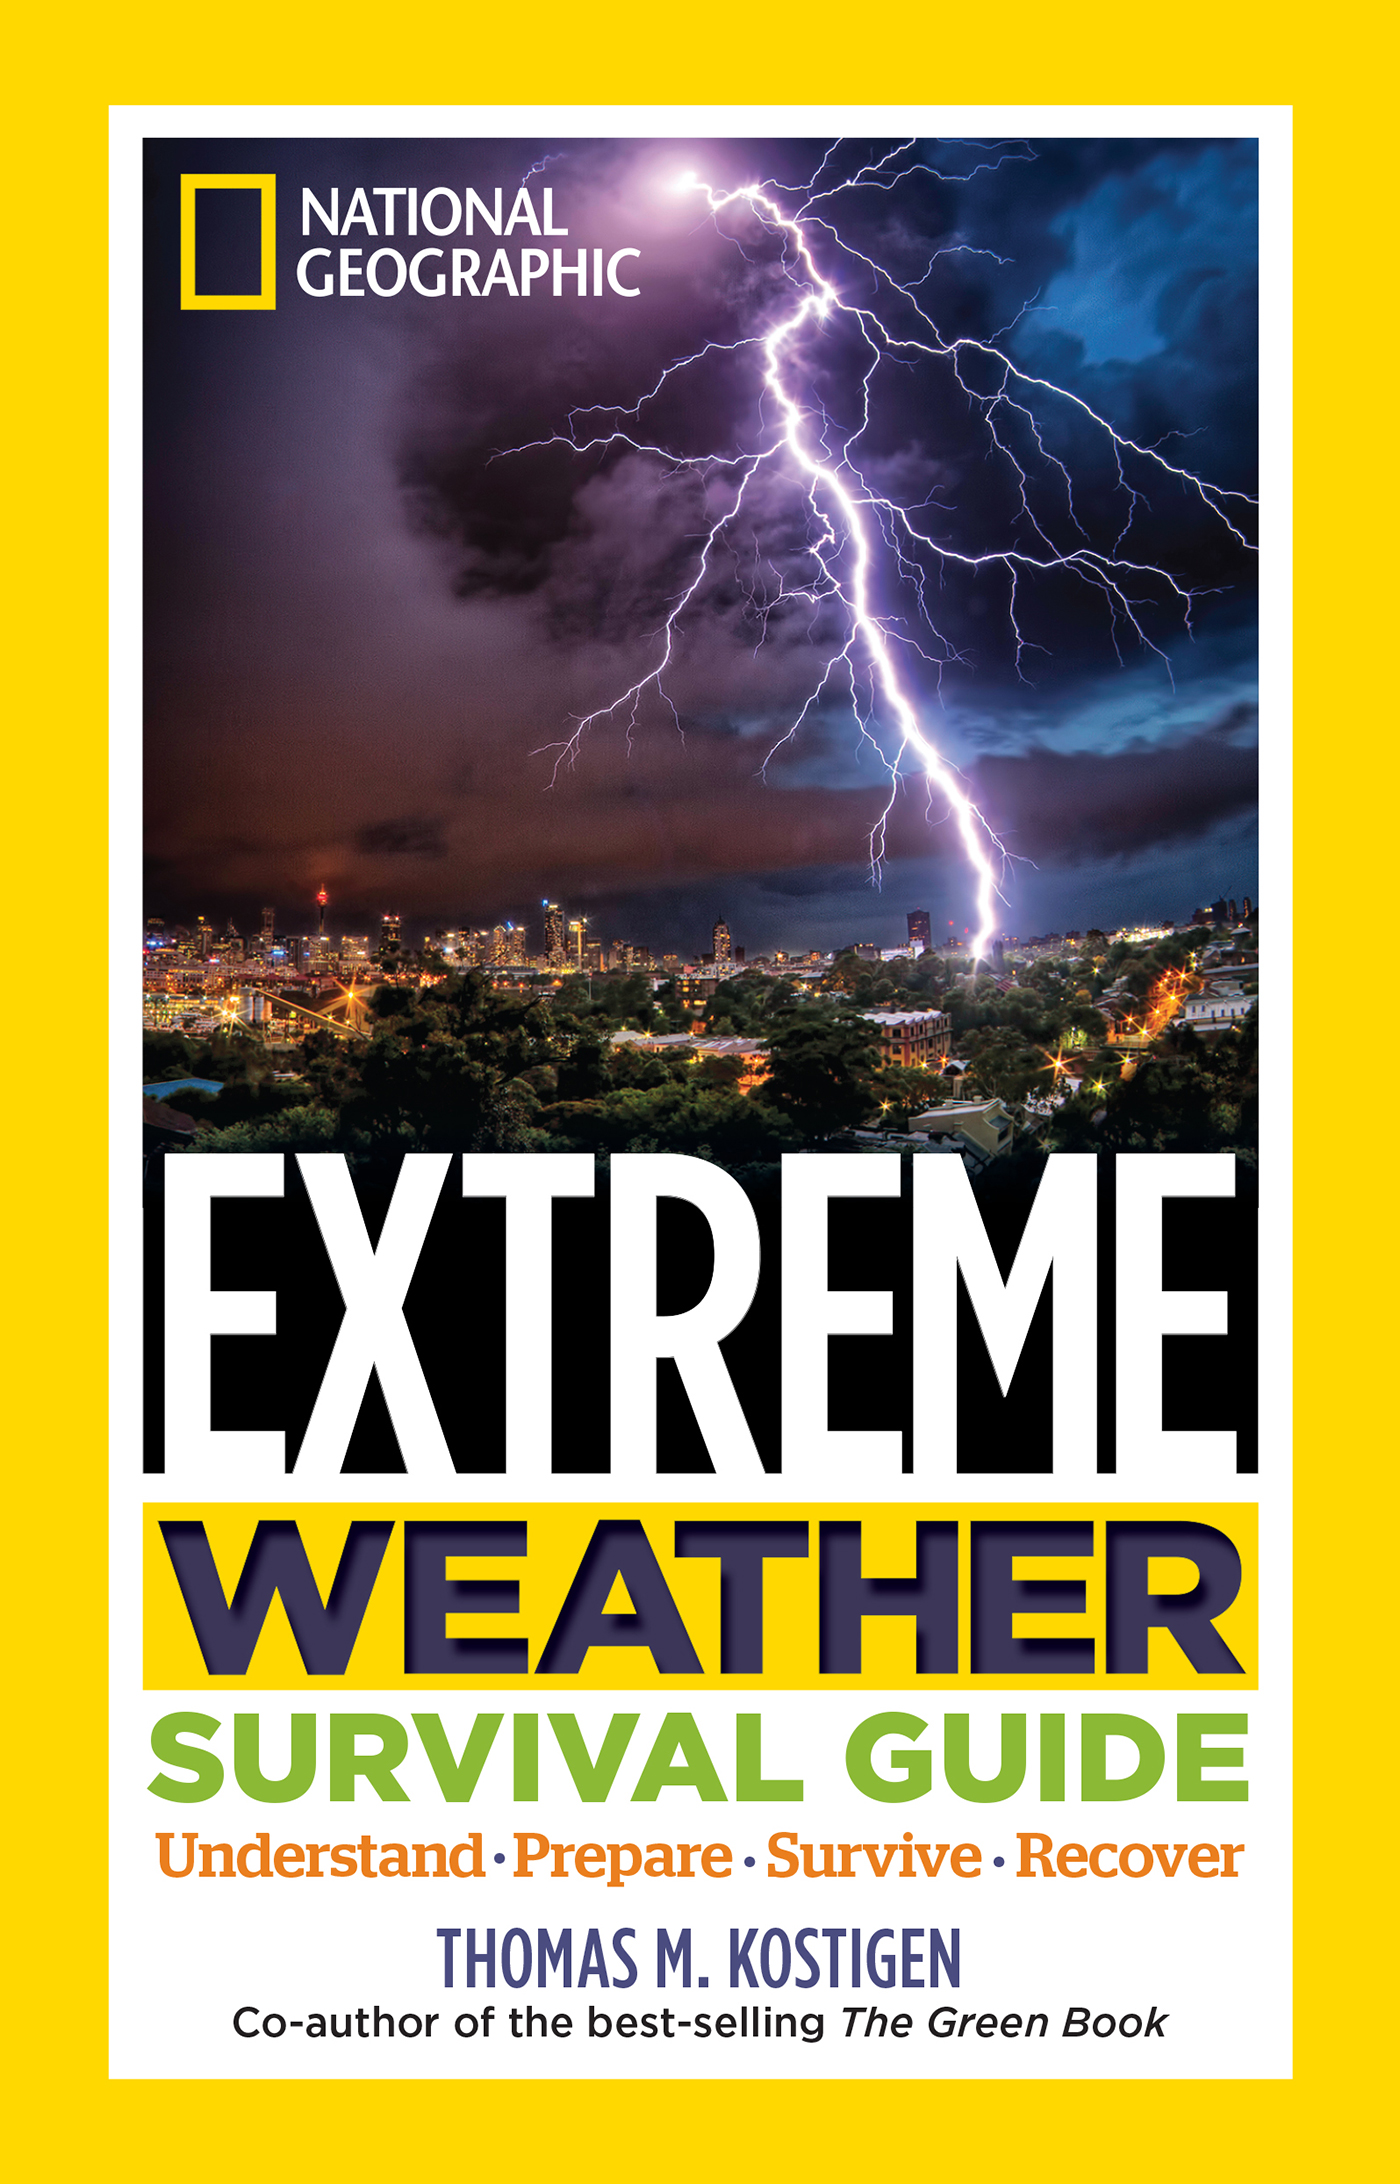 National Geographic extreme weather survival guide understand, prepare, survive, recover cover image